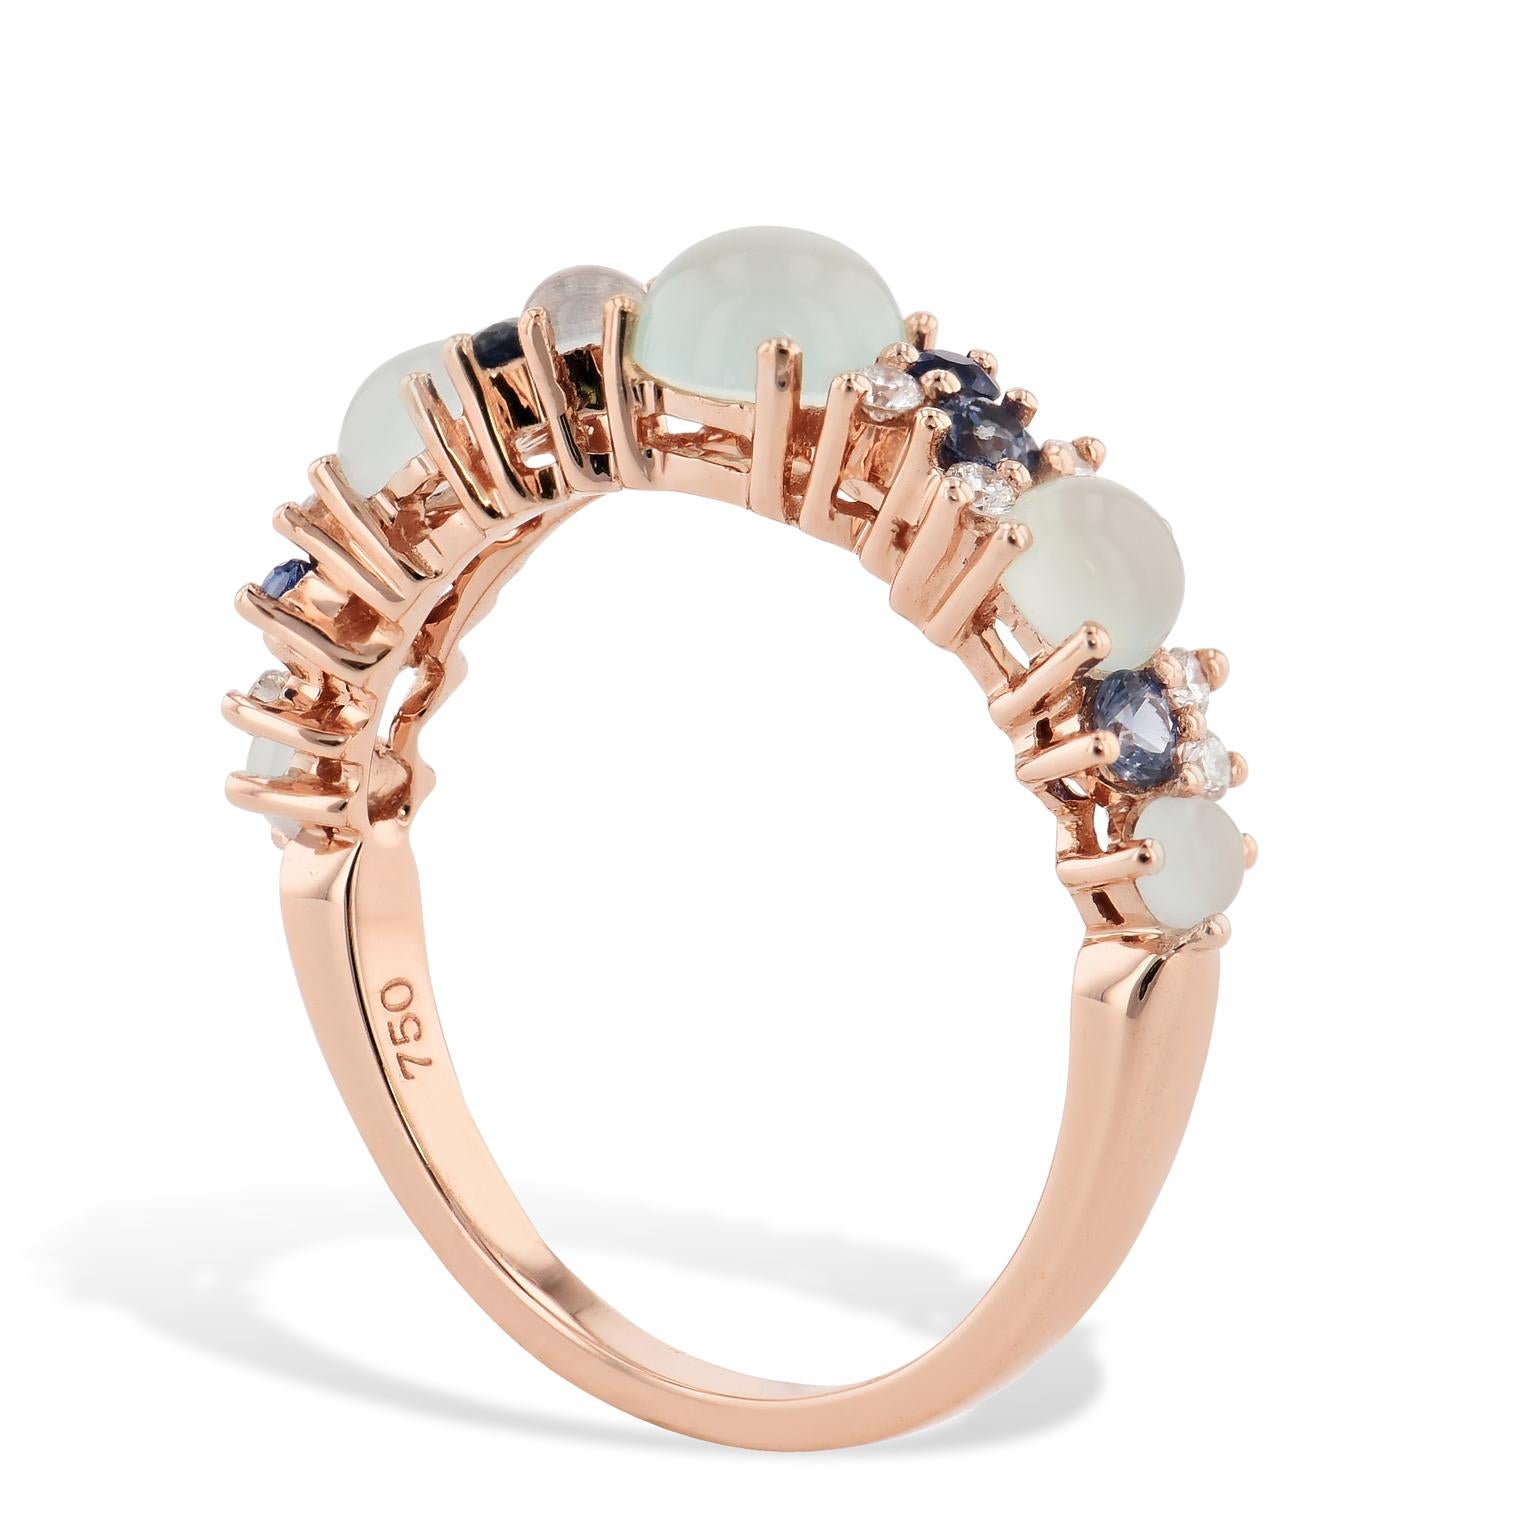 Women's Sea Blue Chalcedony Rose Gold Ring with Diamonds and Sapphires